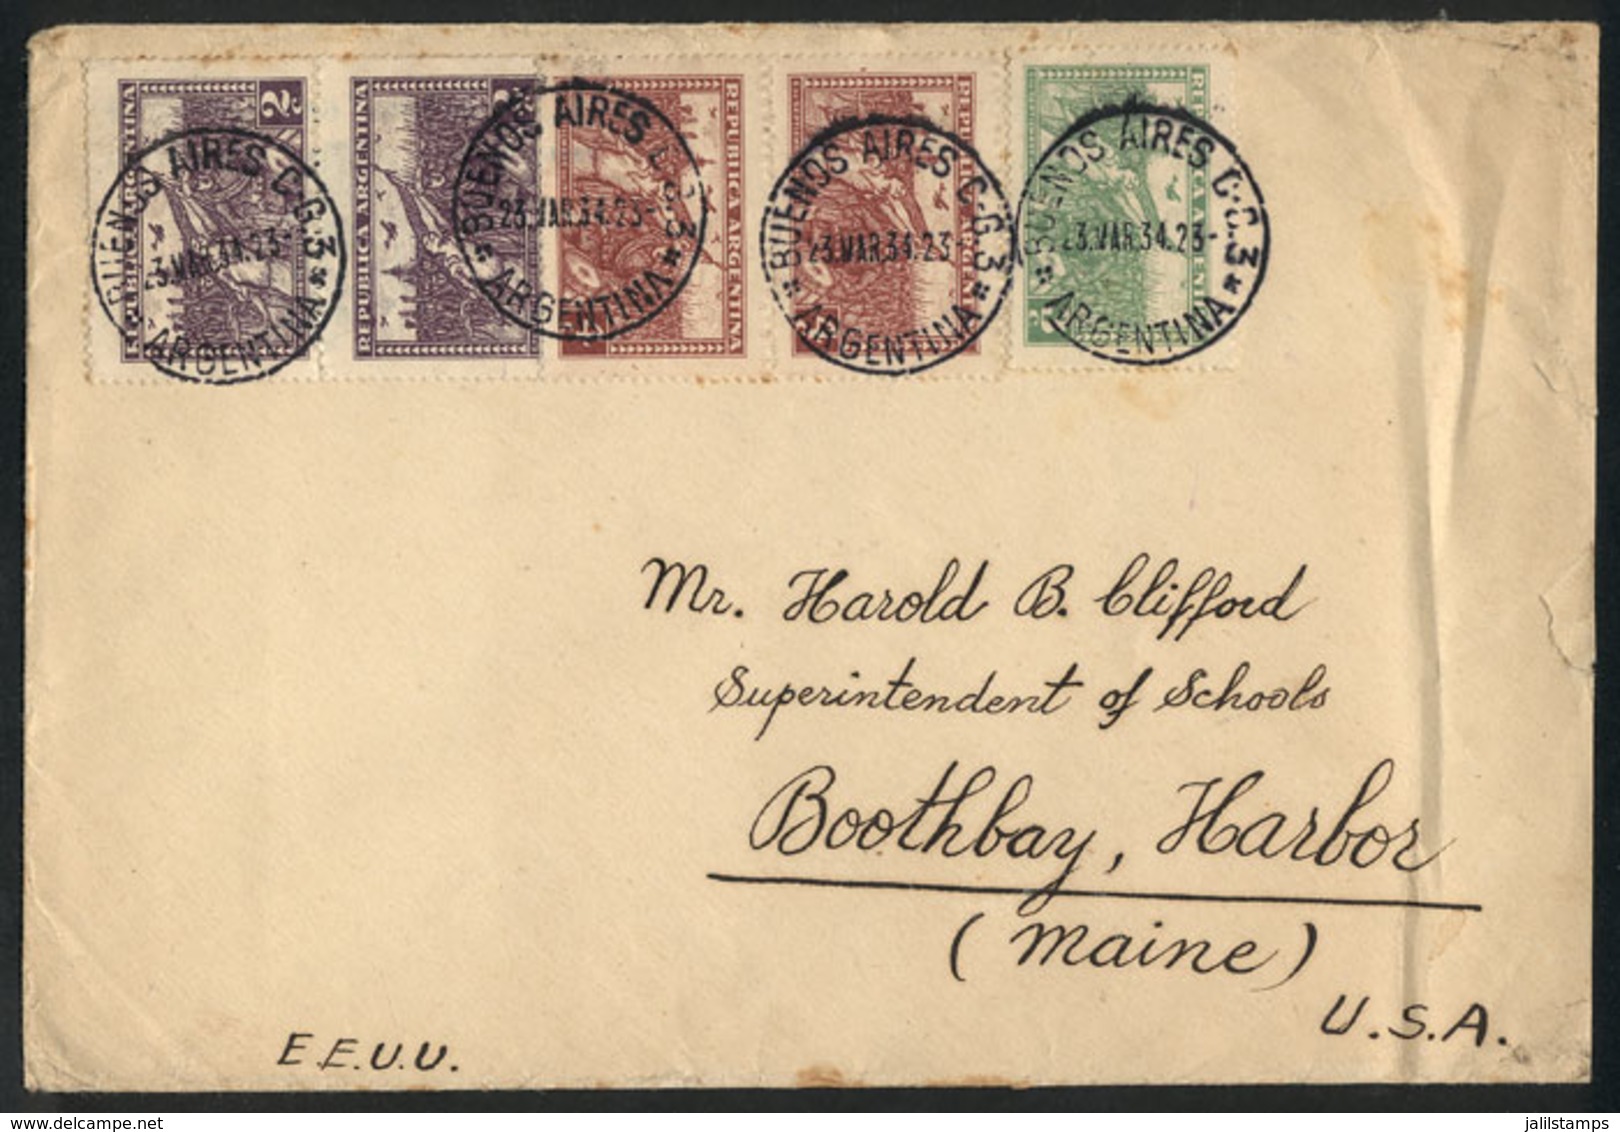 ARGENTINA: Cover Sent To USA On 23/MAR/1934, With Nice Postage Of 15c. Formed With Stamps Of The 1930 Revolution Issue! - Prephilately